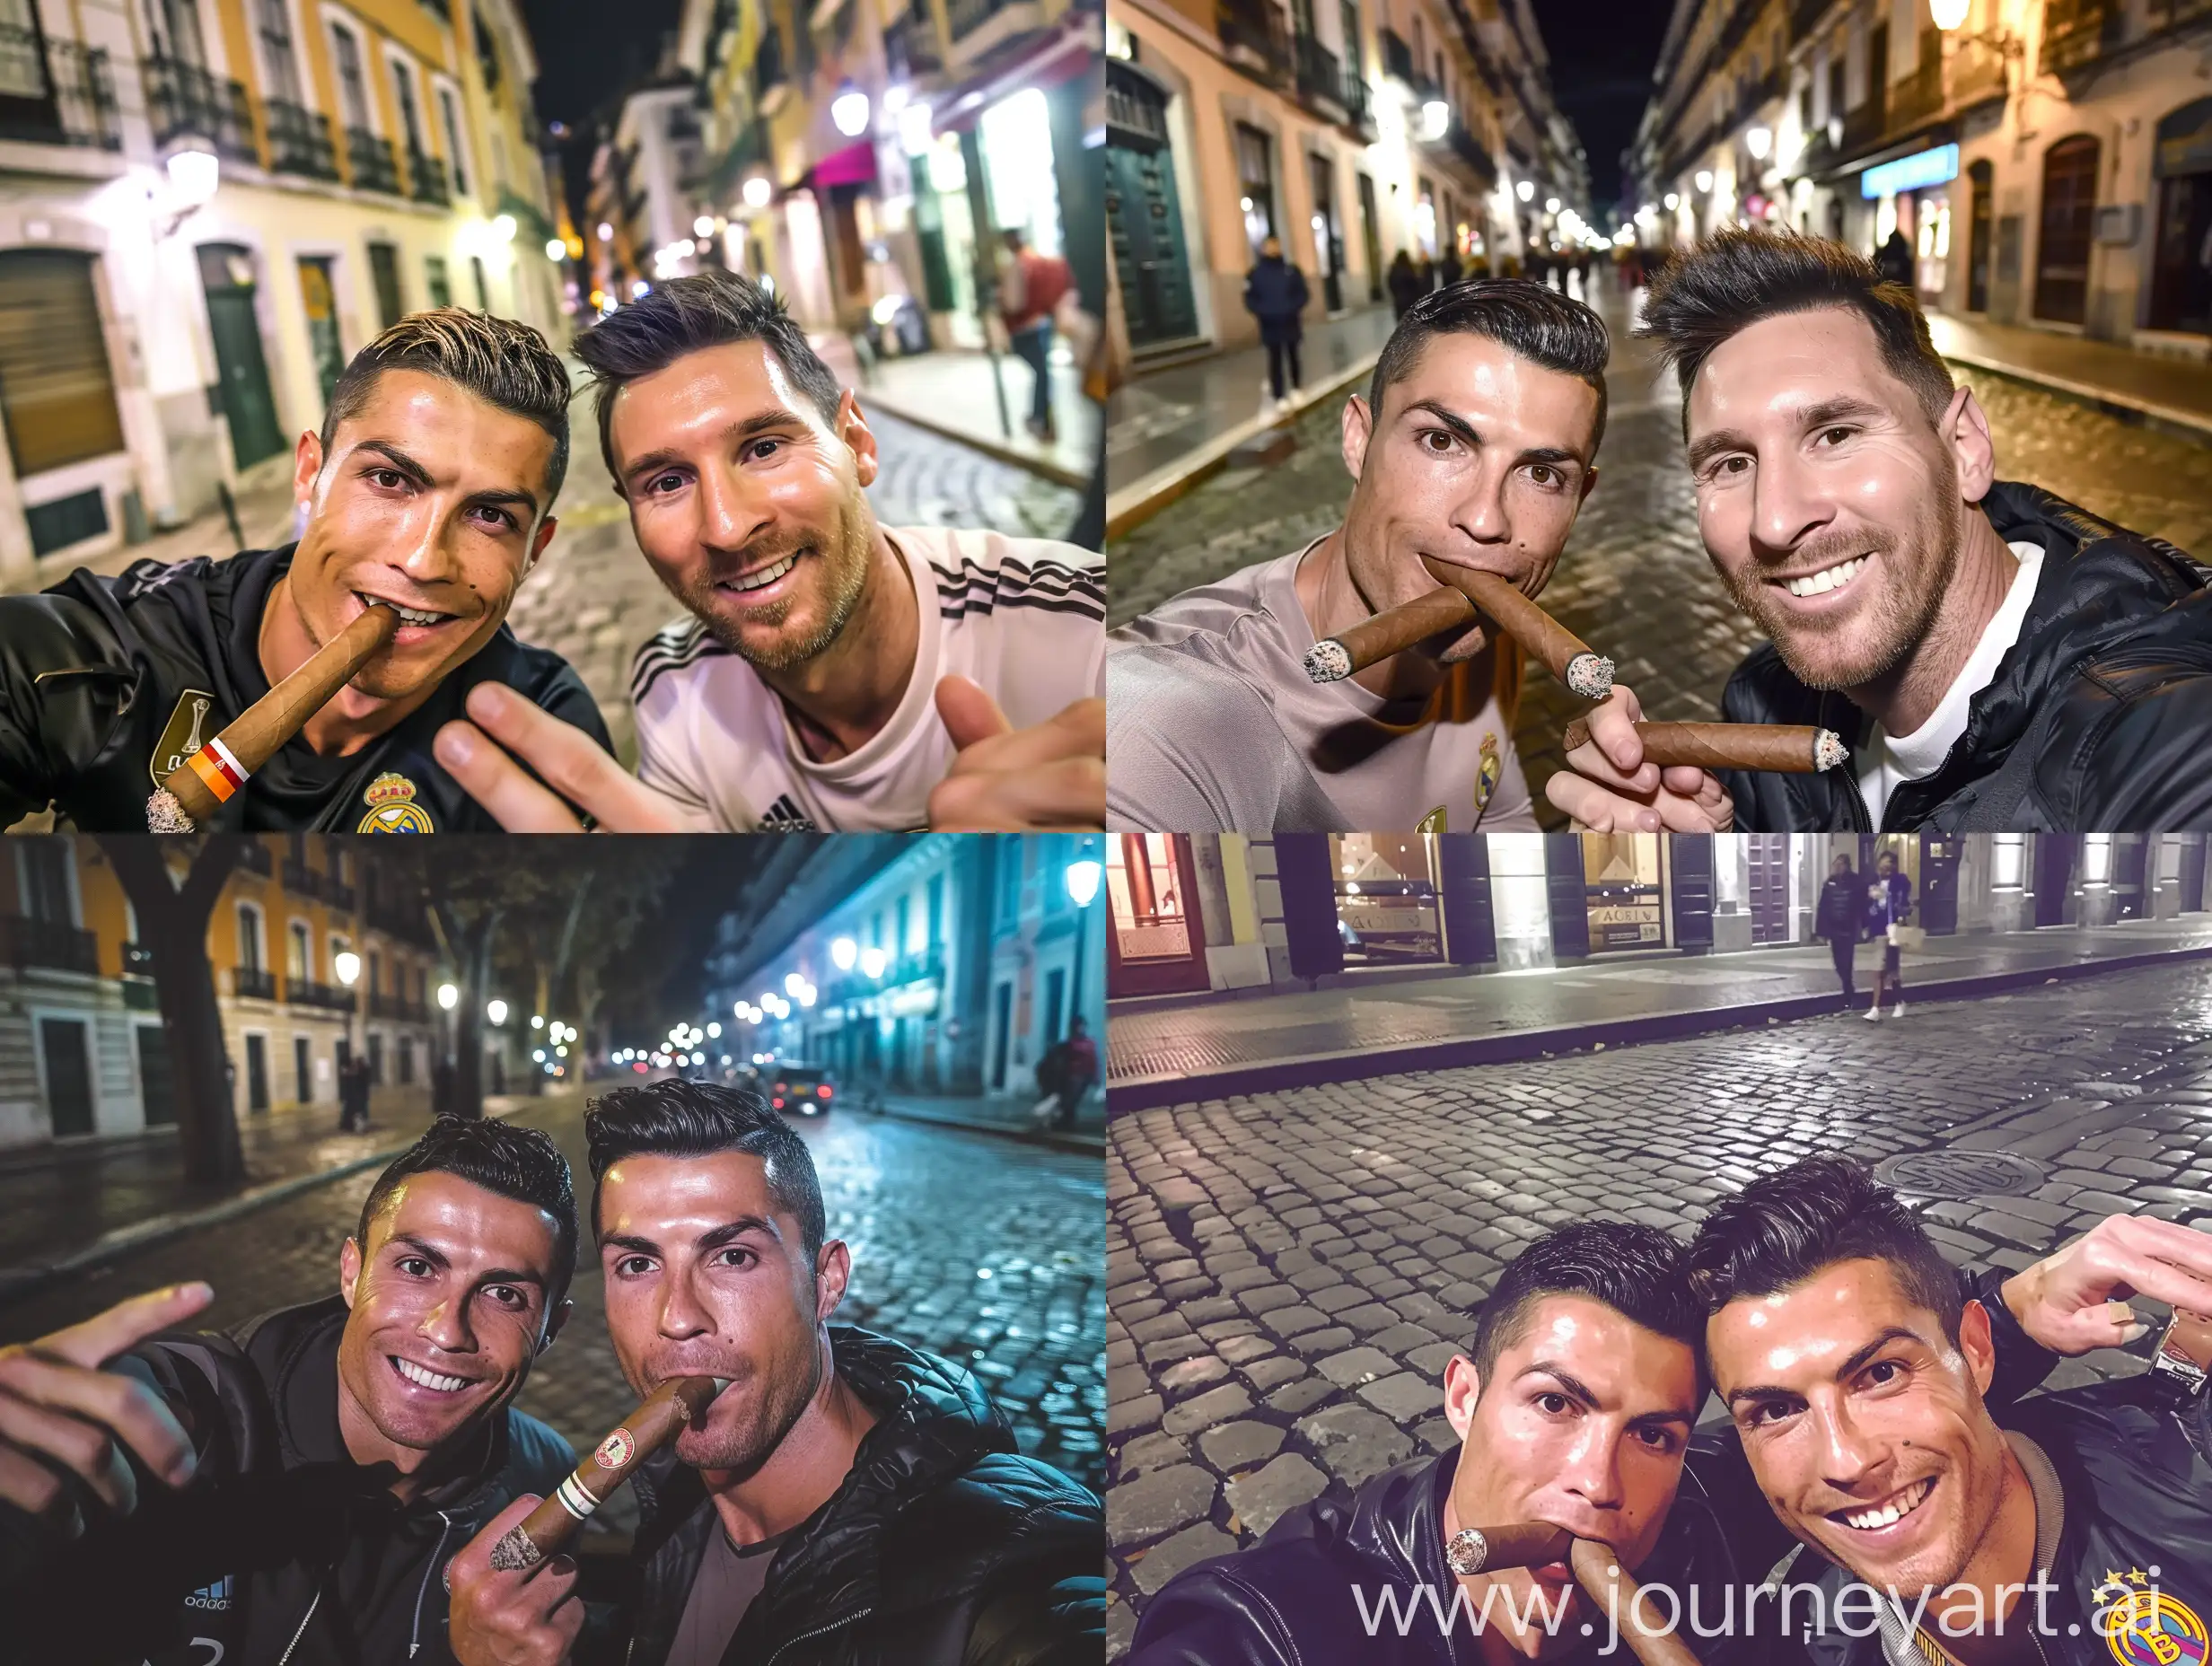 photo taken by a smartphone selfie front camera of cristiano ronaldo and lionel messi together with cigas. selfie, streets, night